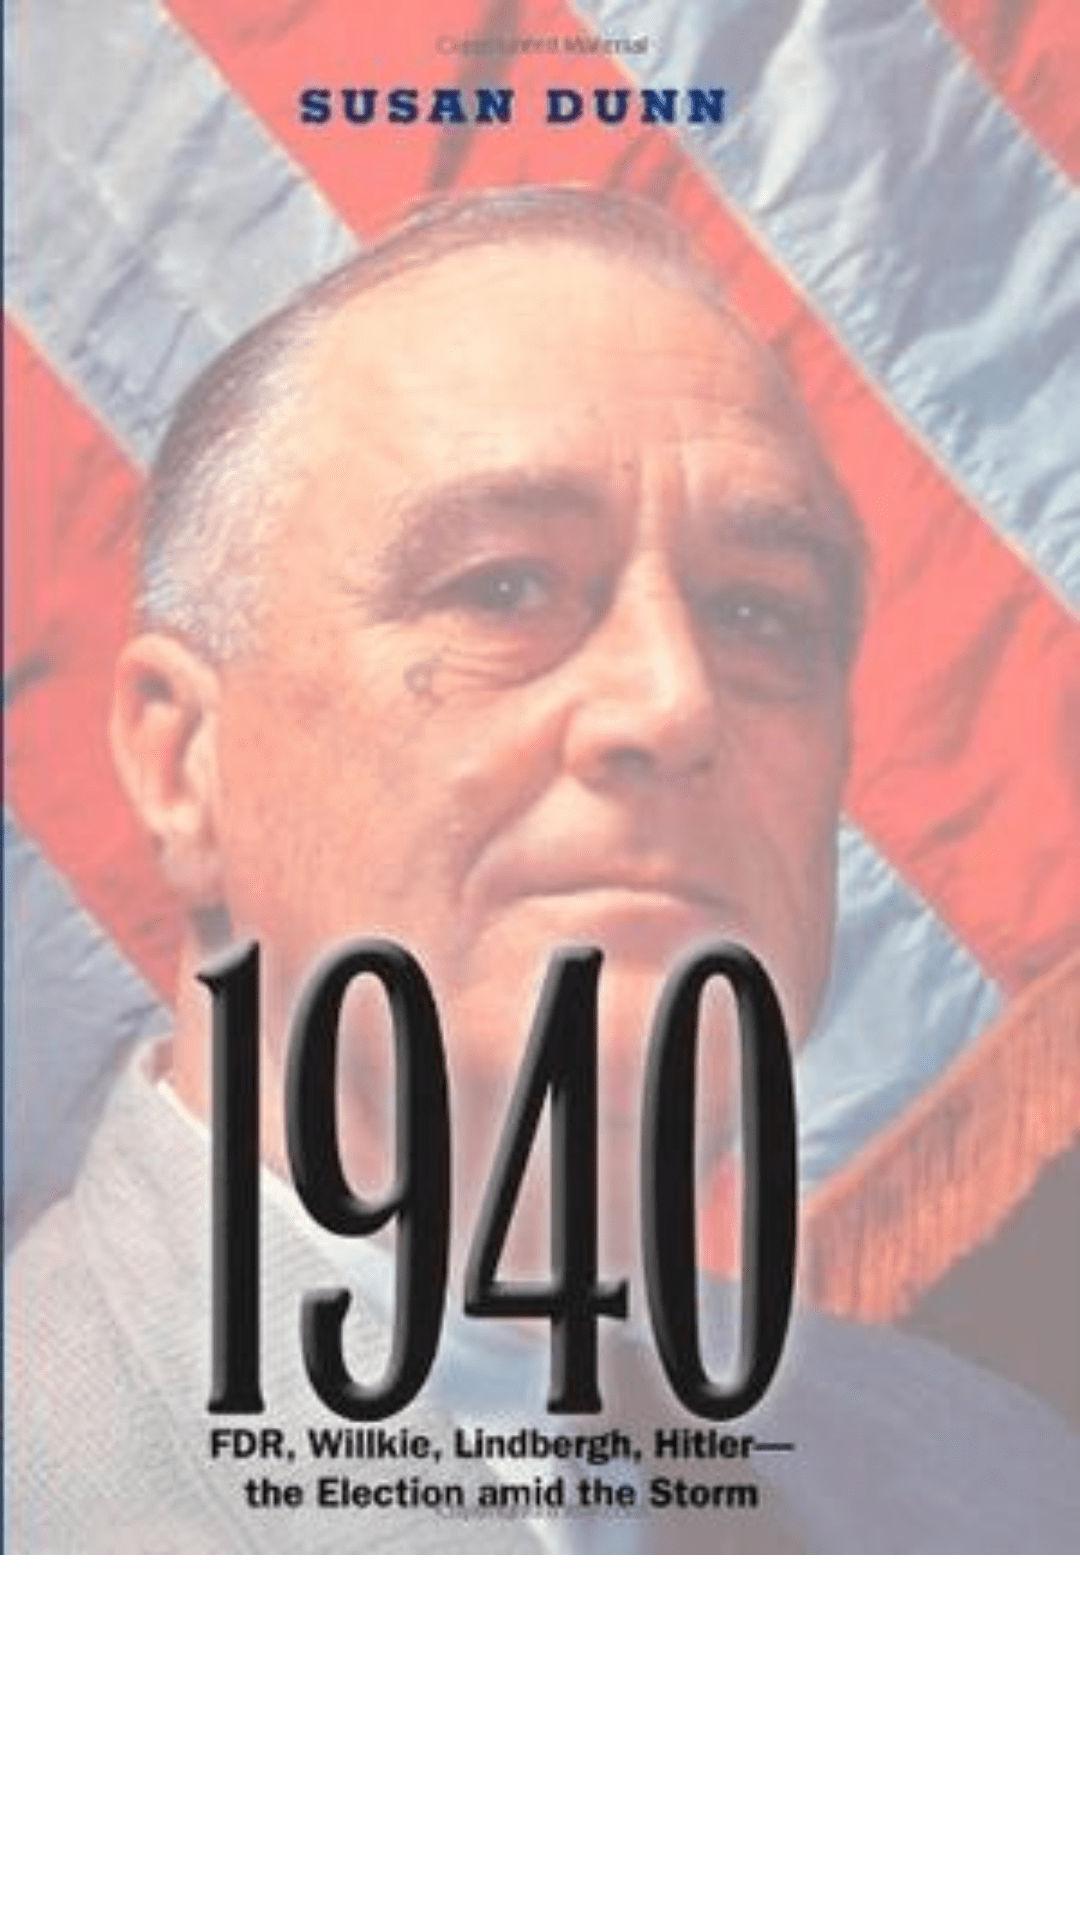 1940: FDR, Willkie, Lindbergh, Hitler�??the Election amid the Storm